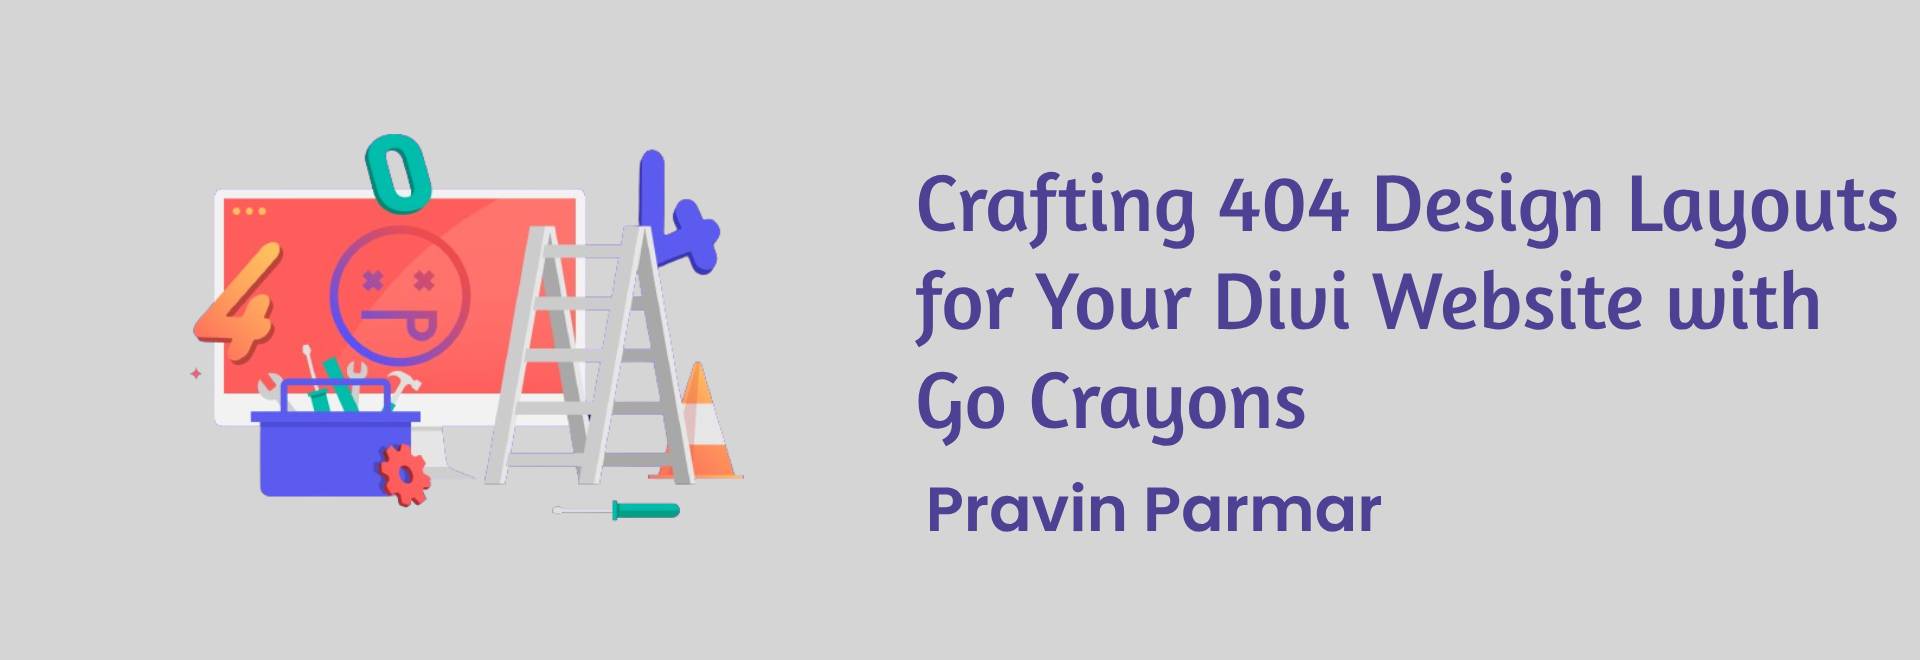 Crafting 404 Design Layouts for Your Divi Website with Go Crayons